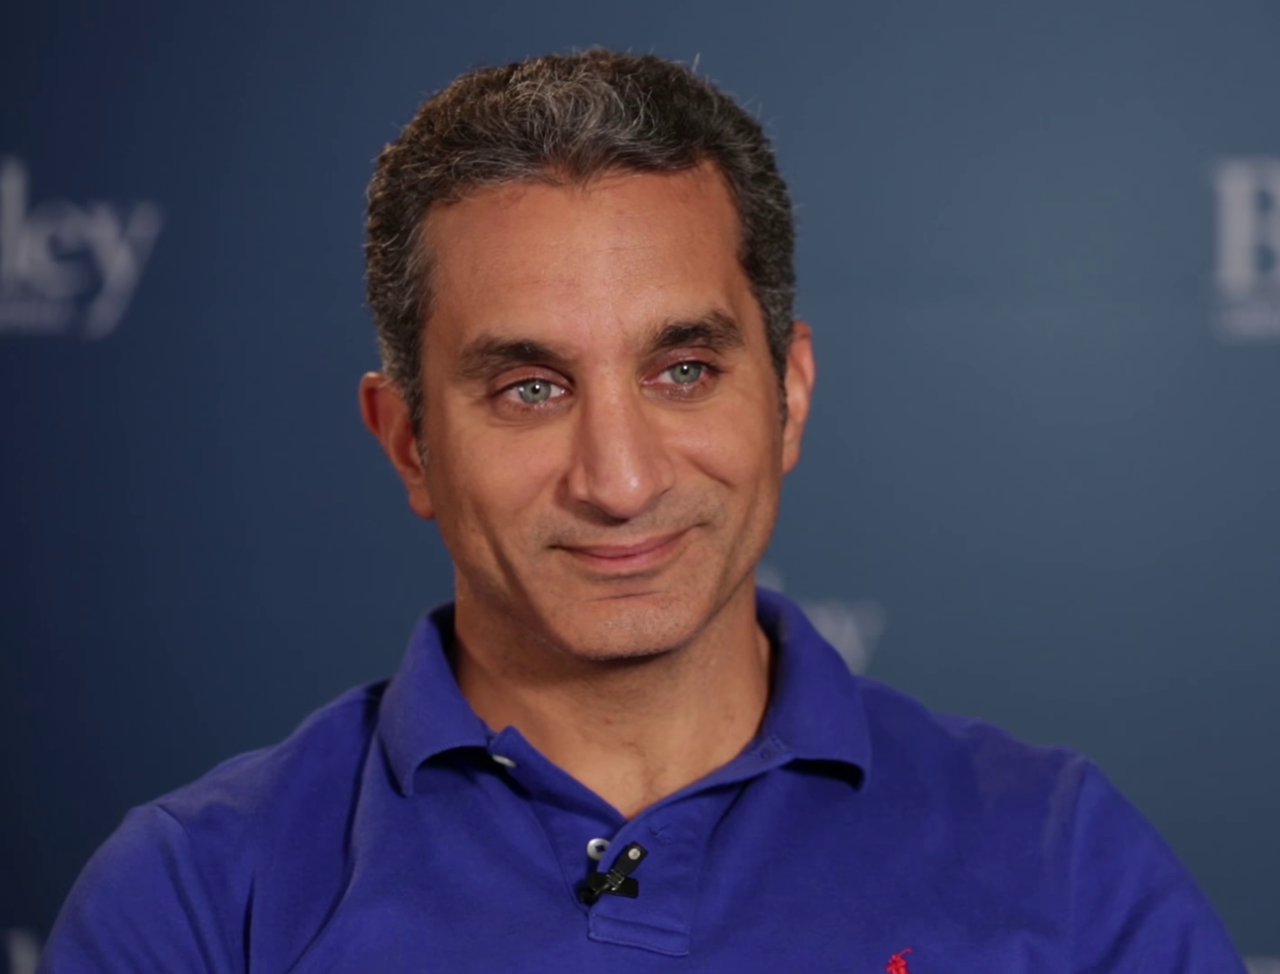 1280px-Bassem_Youssef_in_an_interview_at_the_University_of_California,_Berkeley_(cropped).png